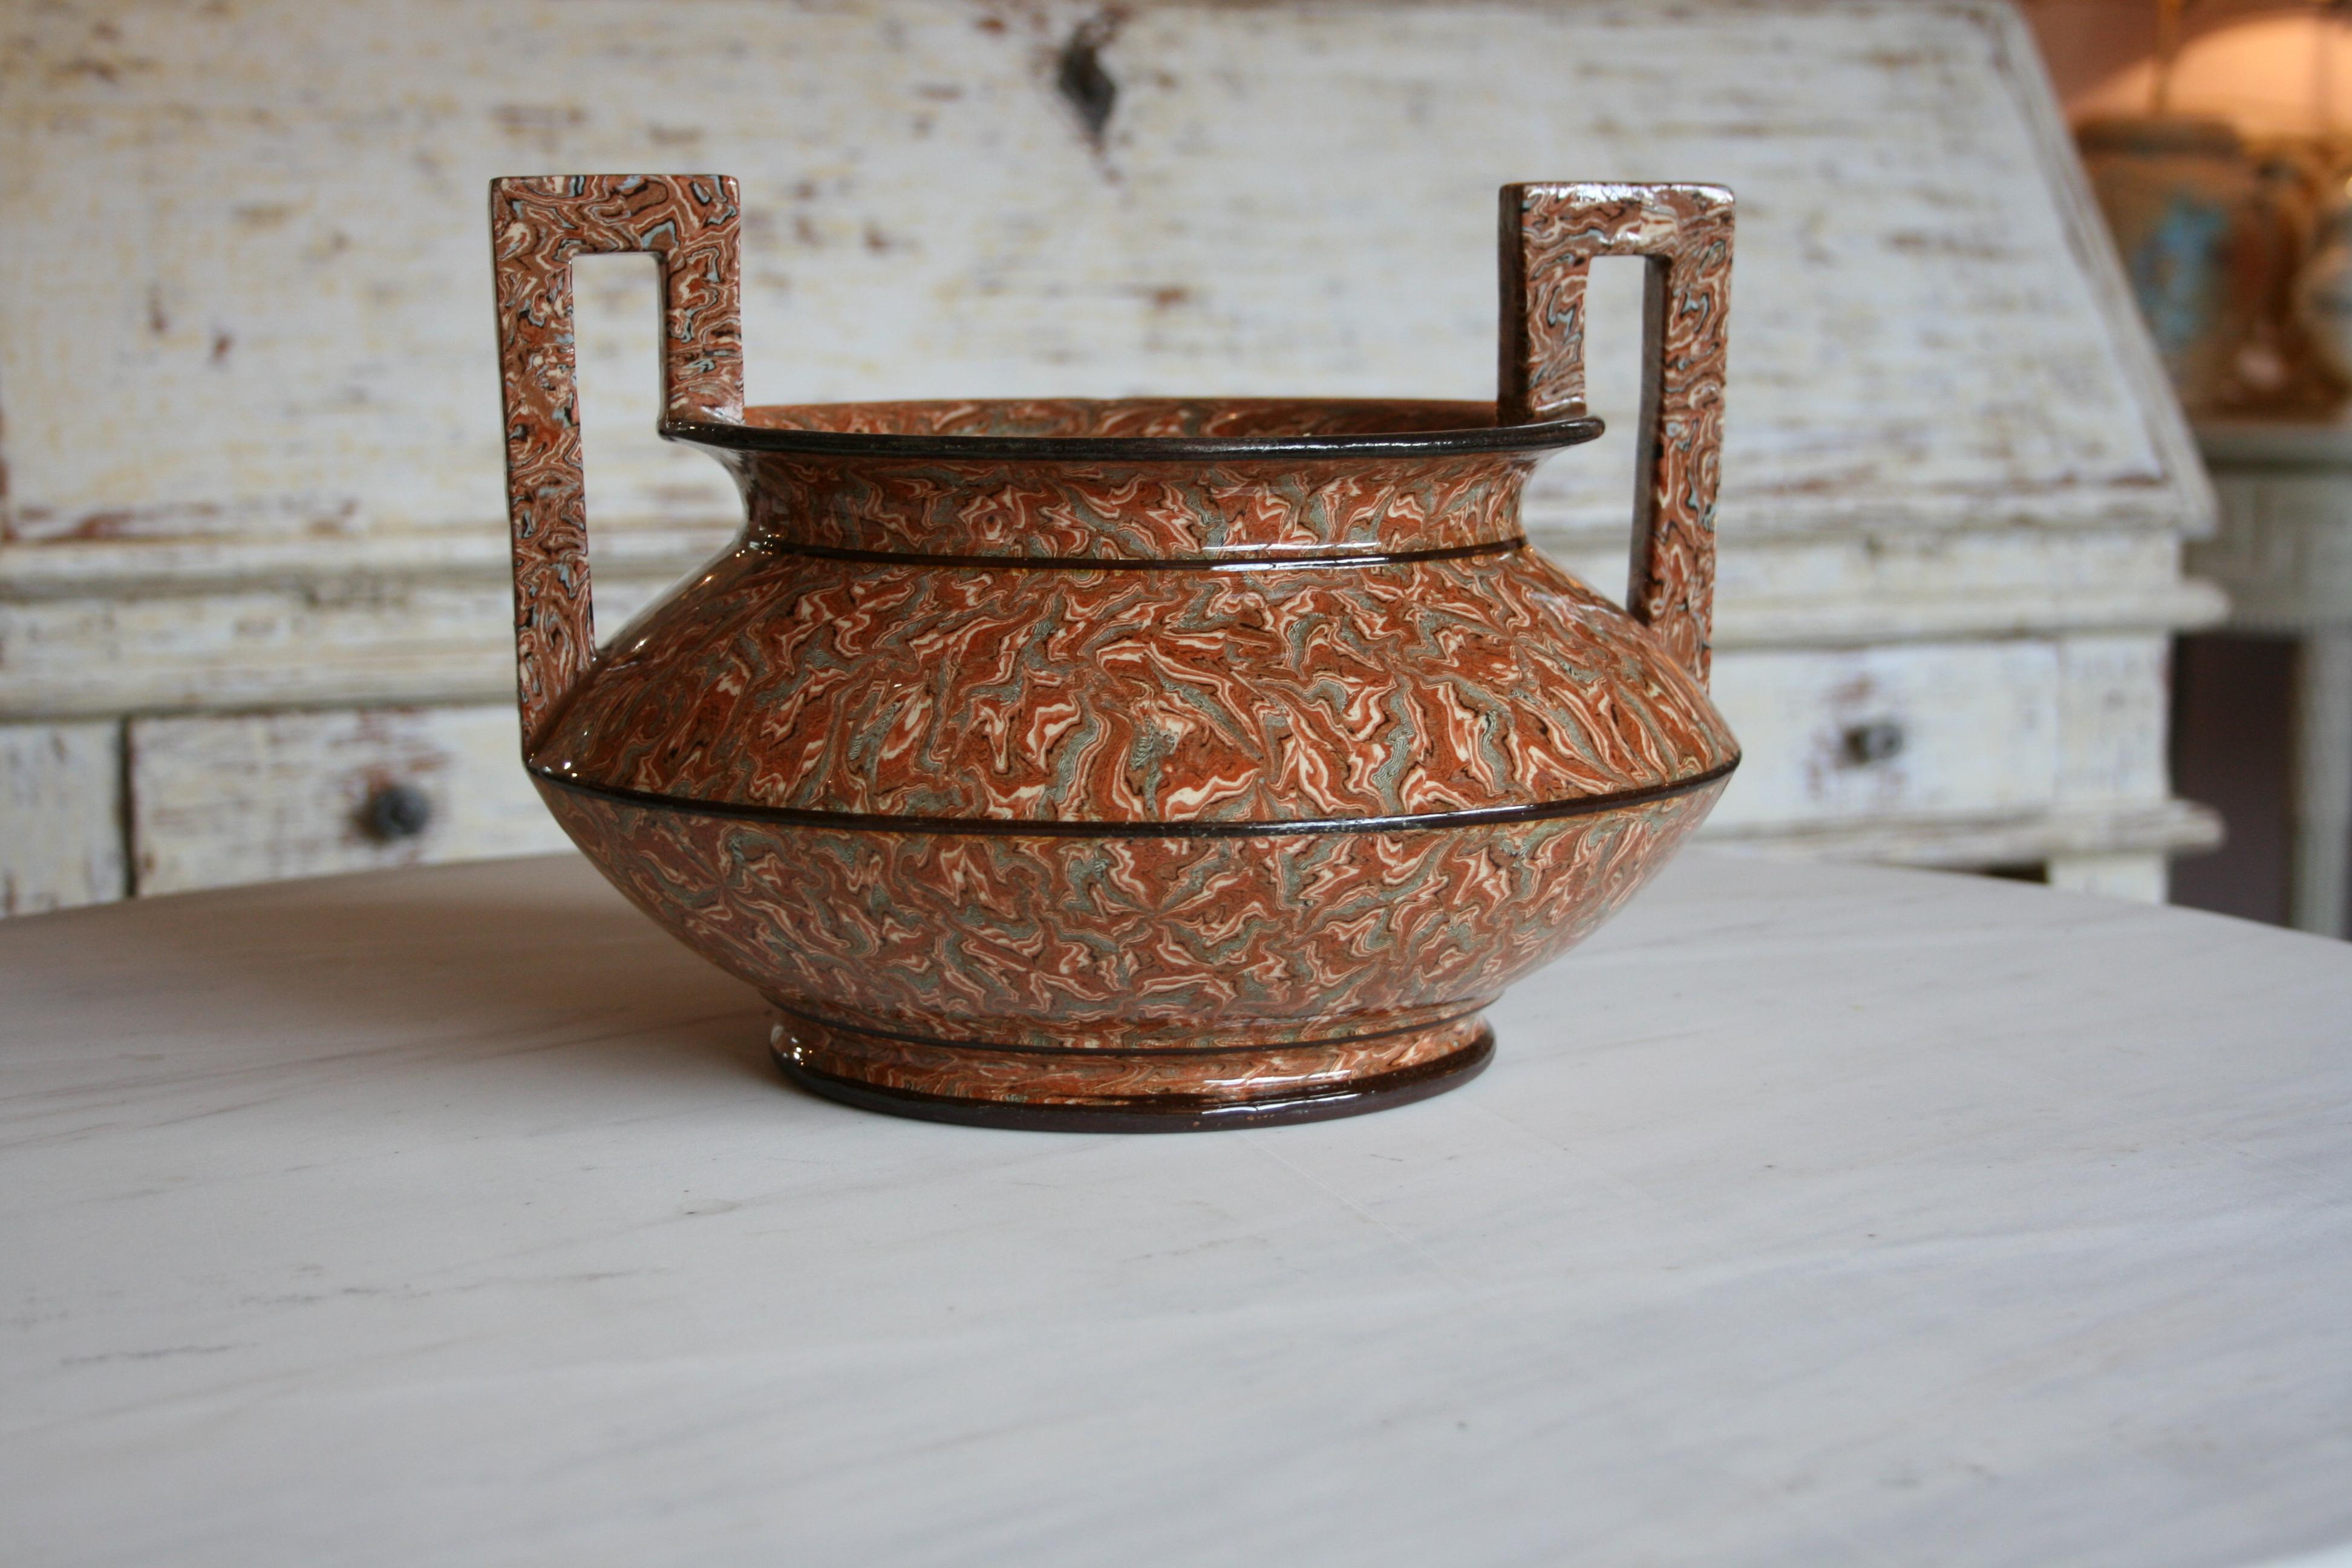 Near perfect example of Provençal agateware from the celebrated Pichon manufacturer, Uzes. Dating from circa 1880 and stamped Pichon to the underside. Wonderful shape with enameled brown, ochre and grey tones and Greek key handles.